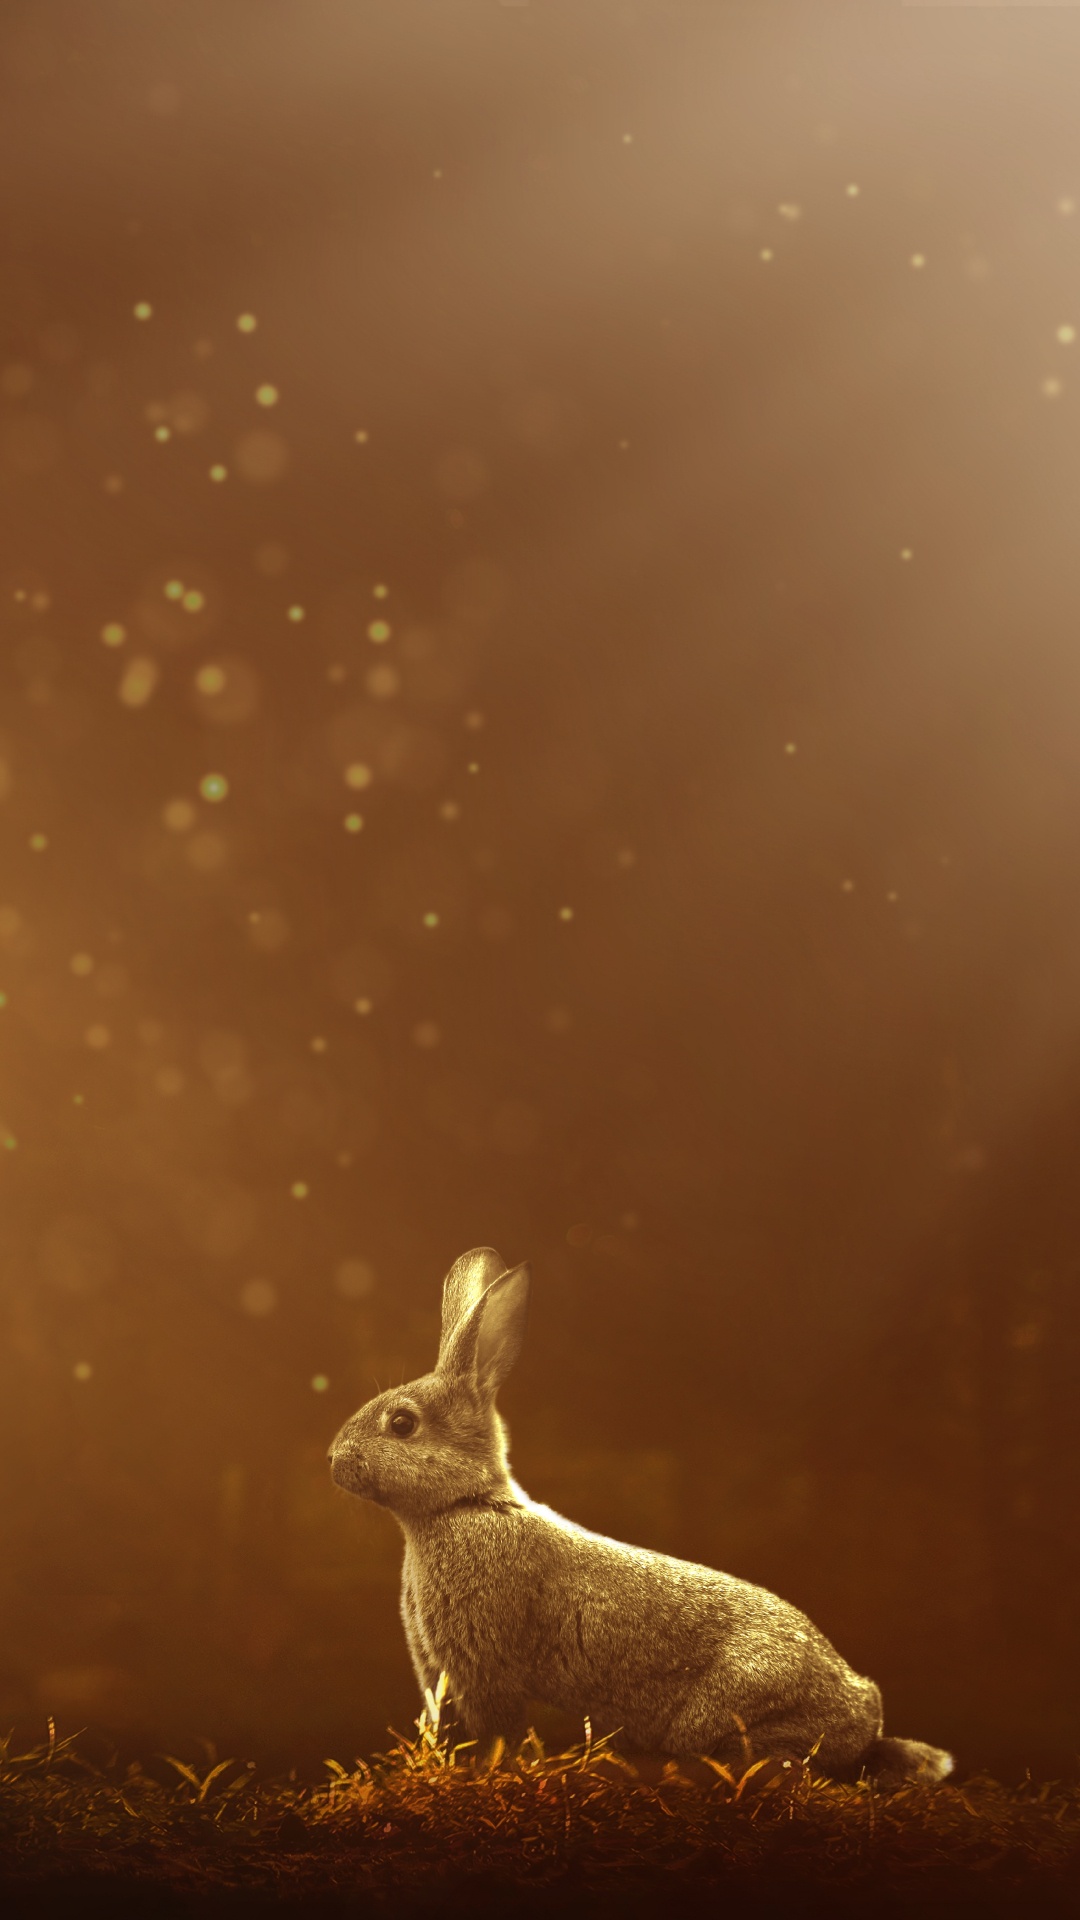 White Rabbit on Brown Grass Field During Night Time. Wallpaper in 1080x1920 Resolution